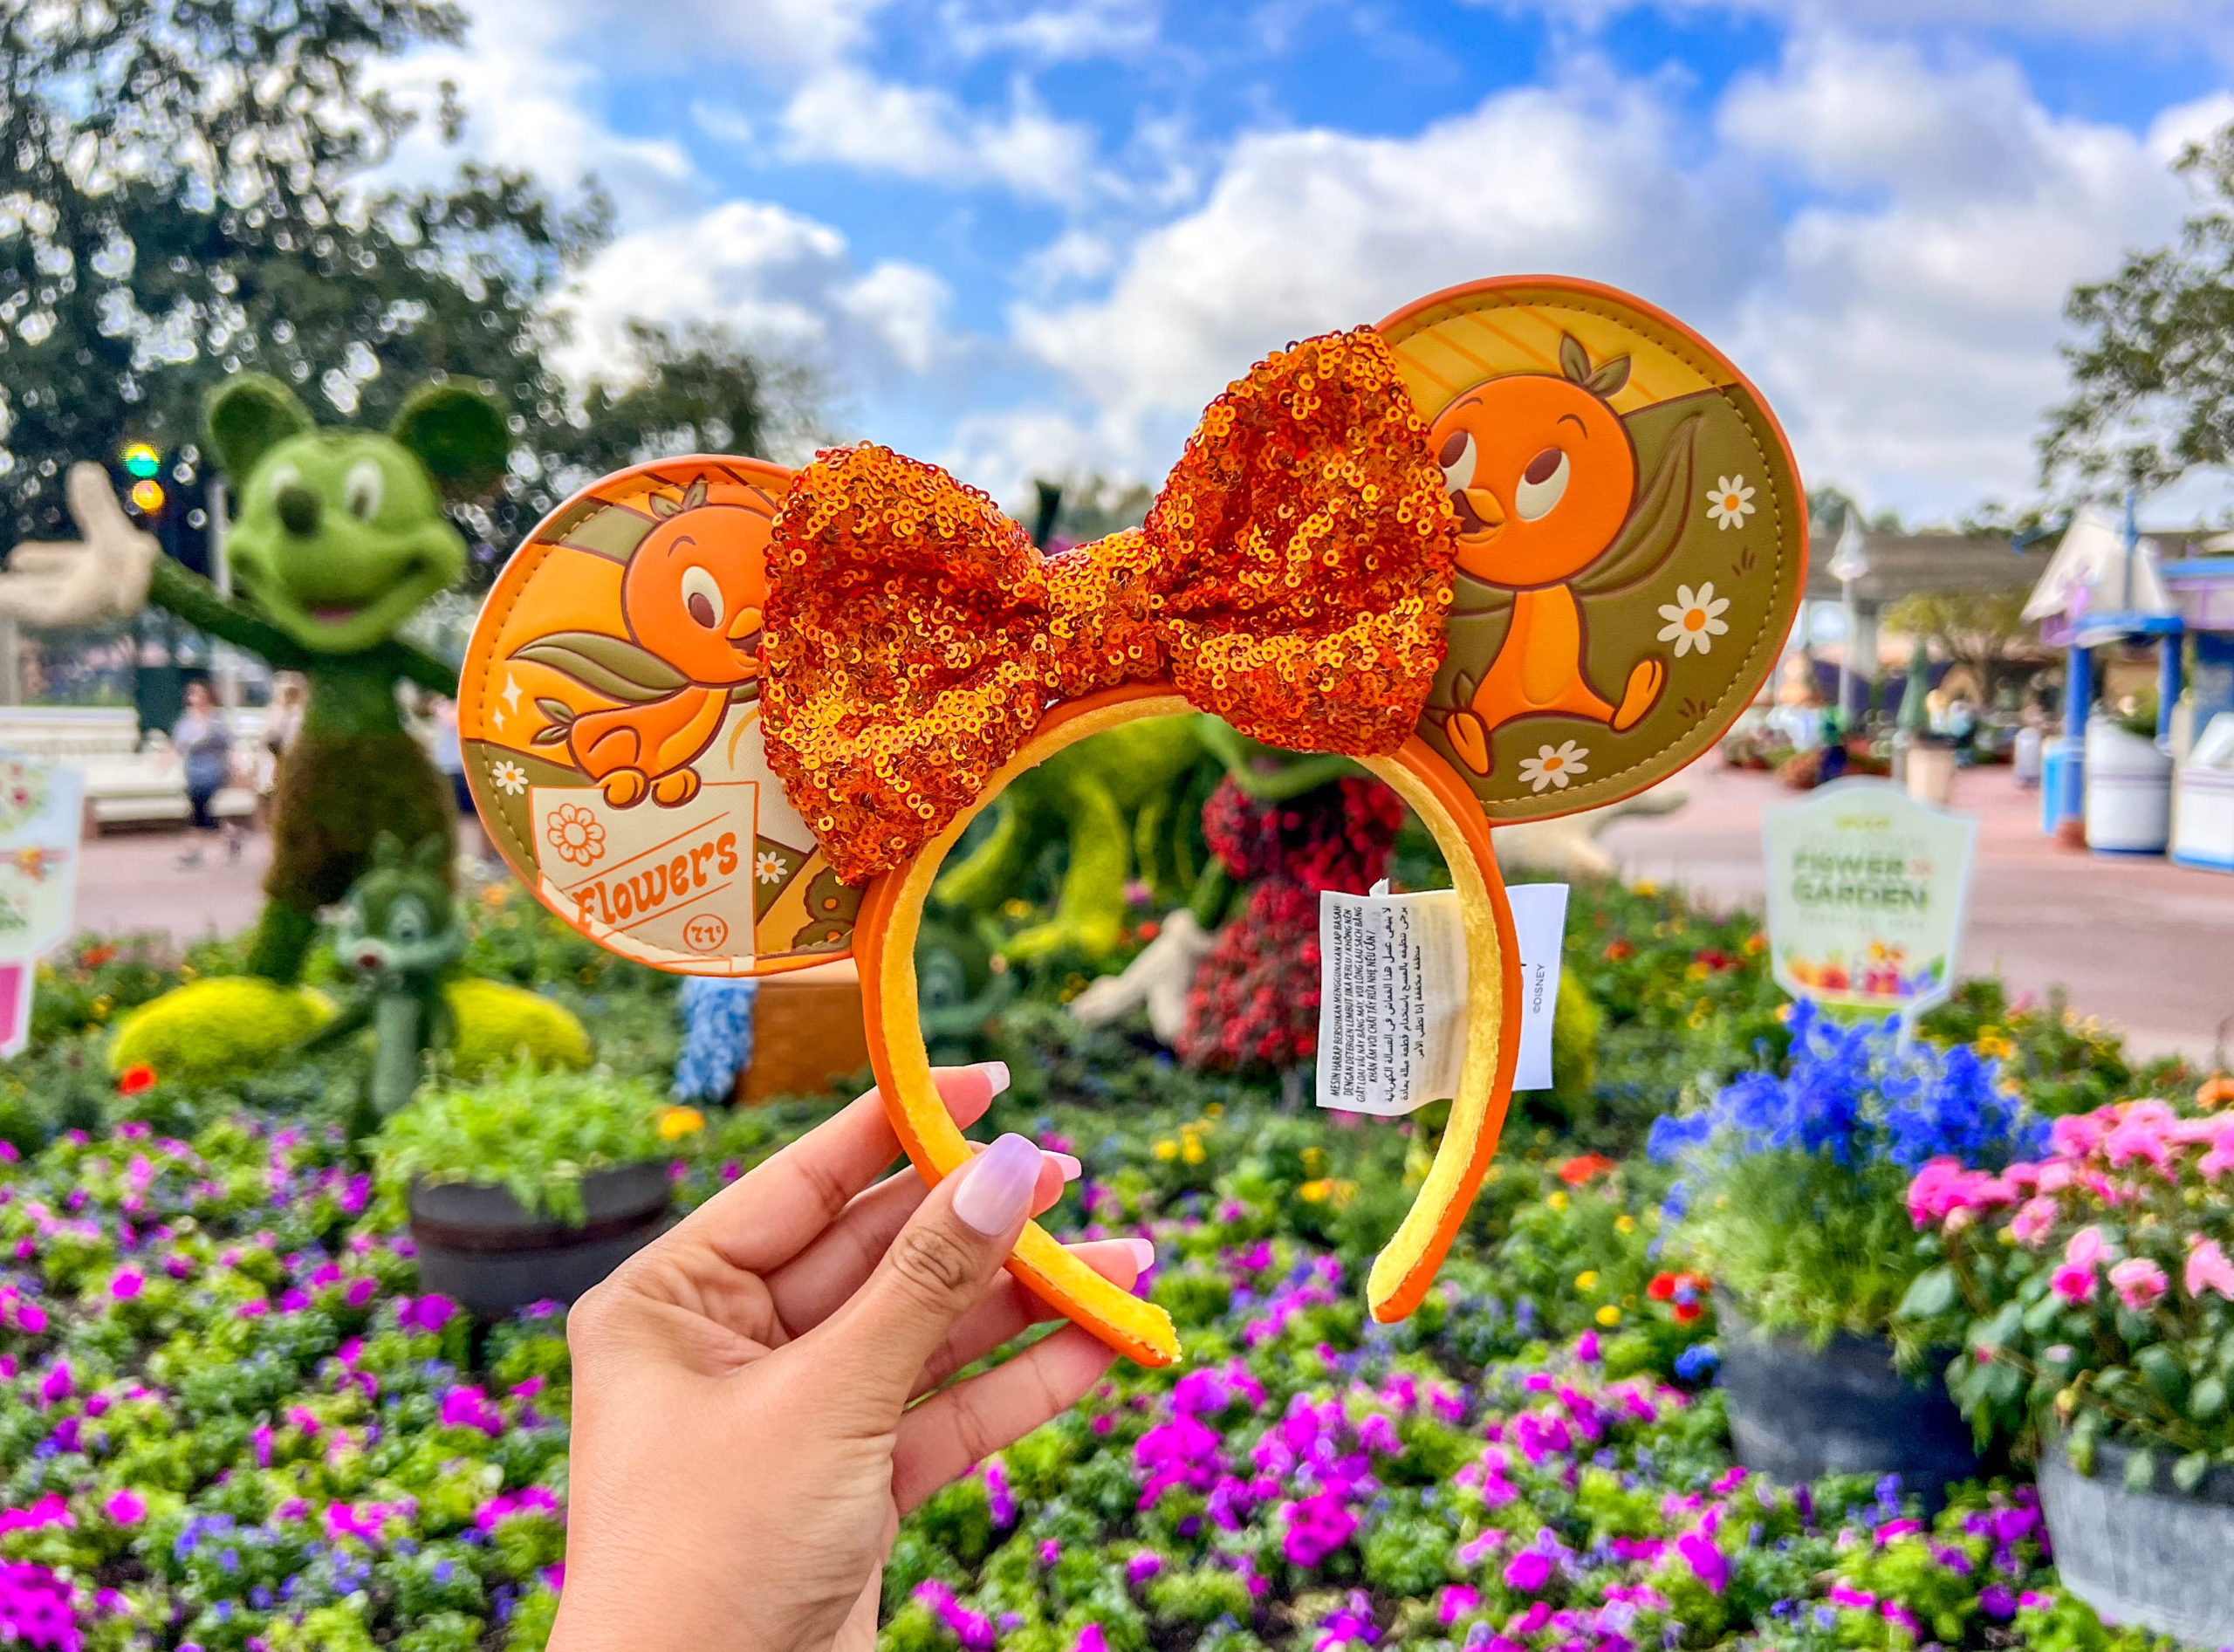 ALL The Merchandise at the 2023 EPCOT Flower & Garden Festival